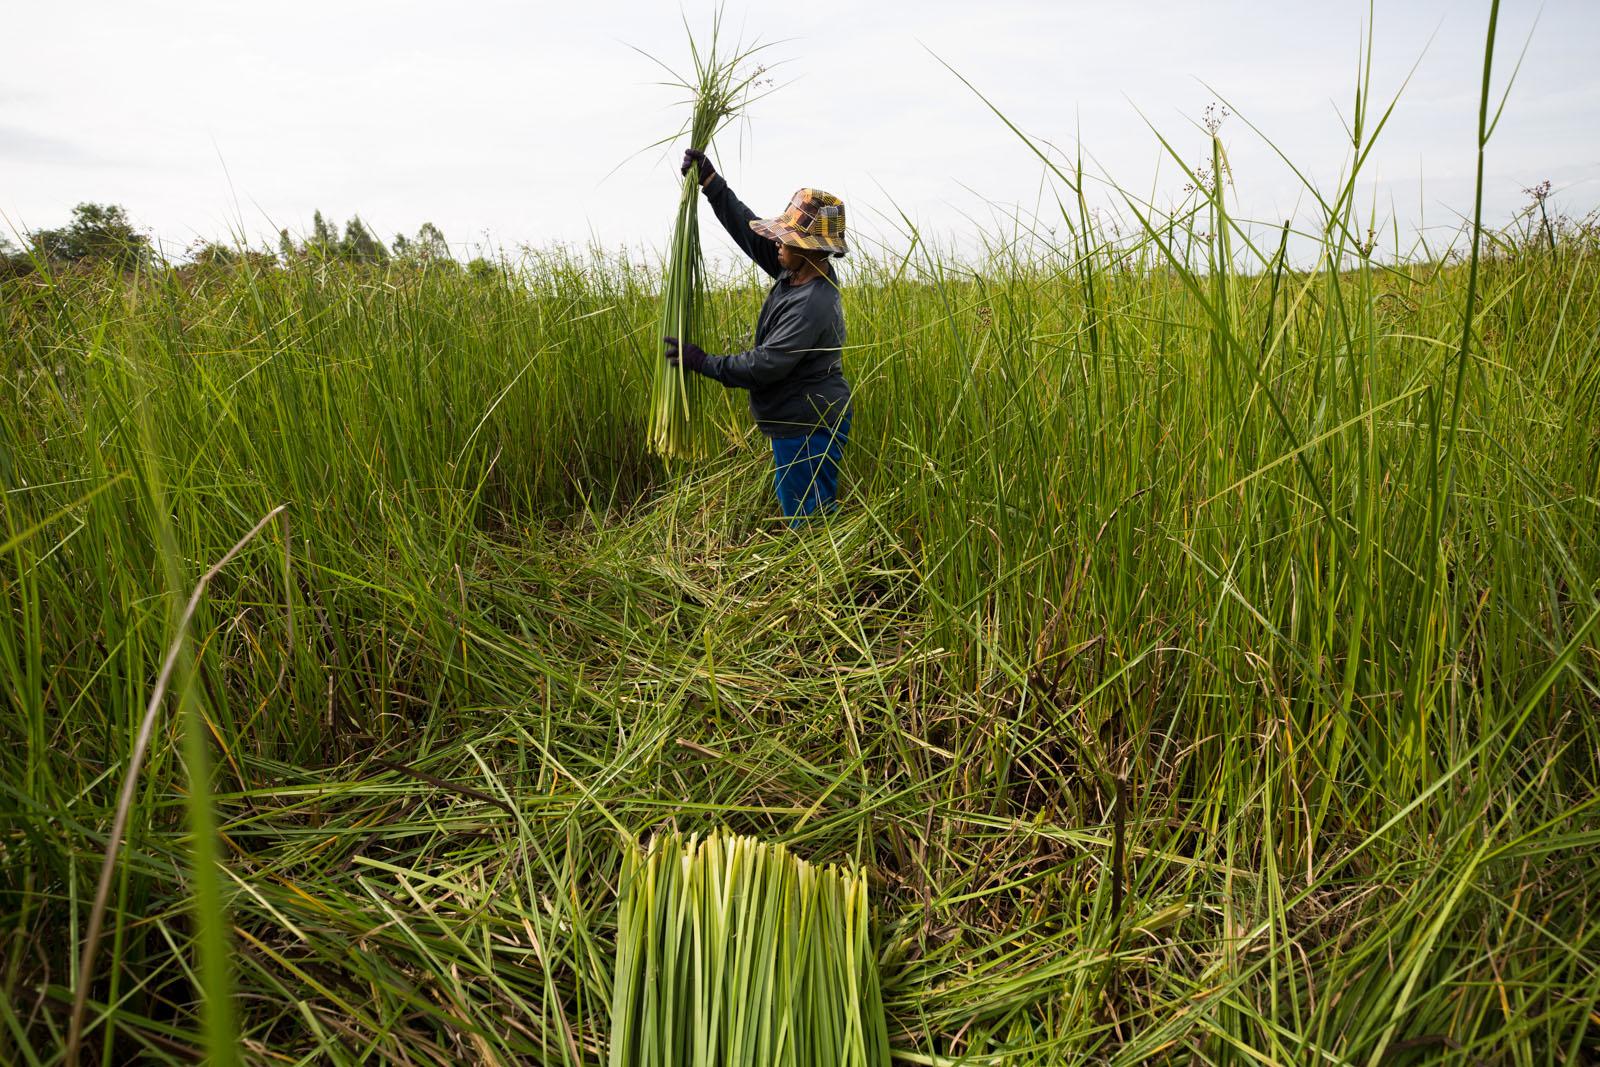 THREE DECADES OF AN ANTI-DAM STRUGGLE - Local villagers collect a reed that grows at the edge of...